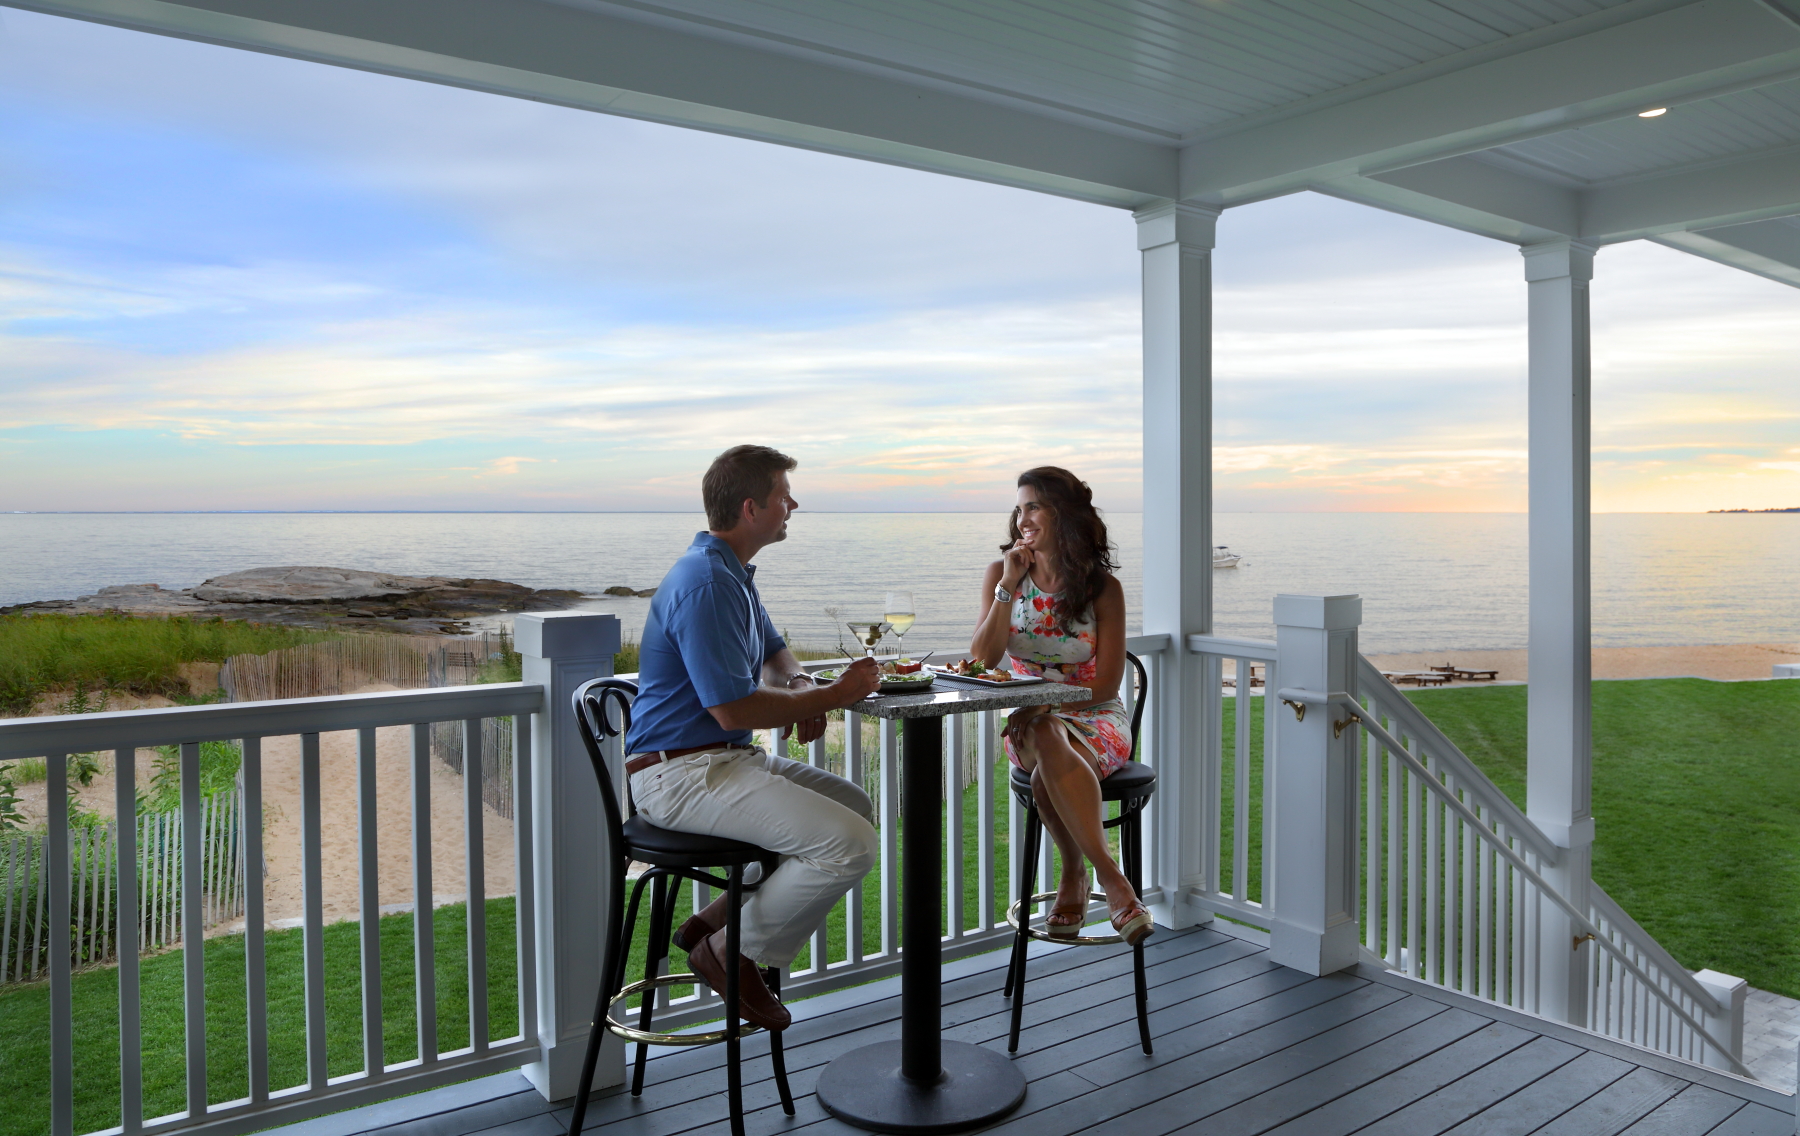 Outside Dining Overlooking Long Island Sound. Available year-round with beautiful sunrises and sunsets